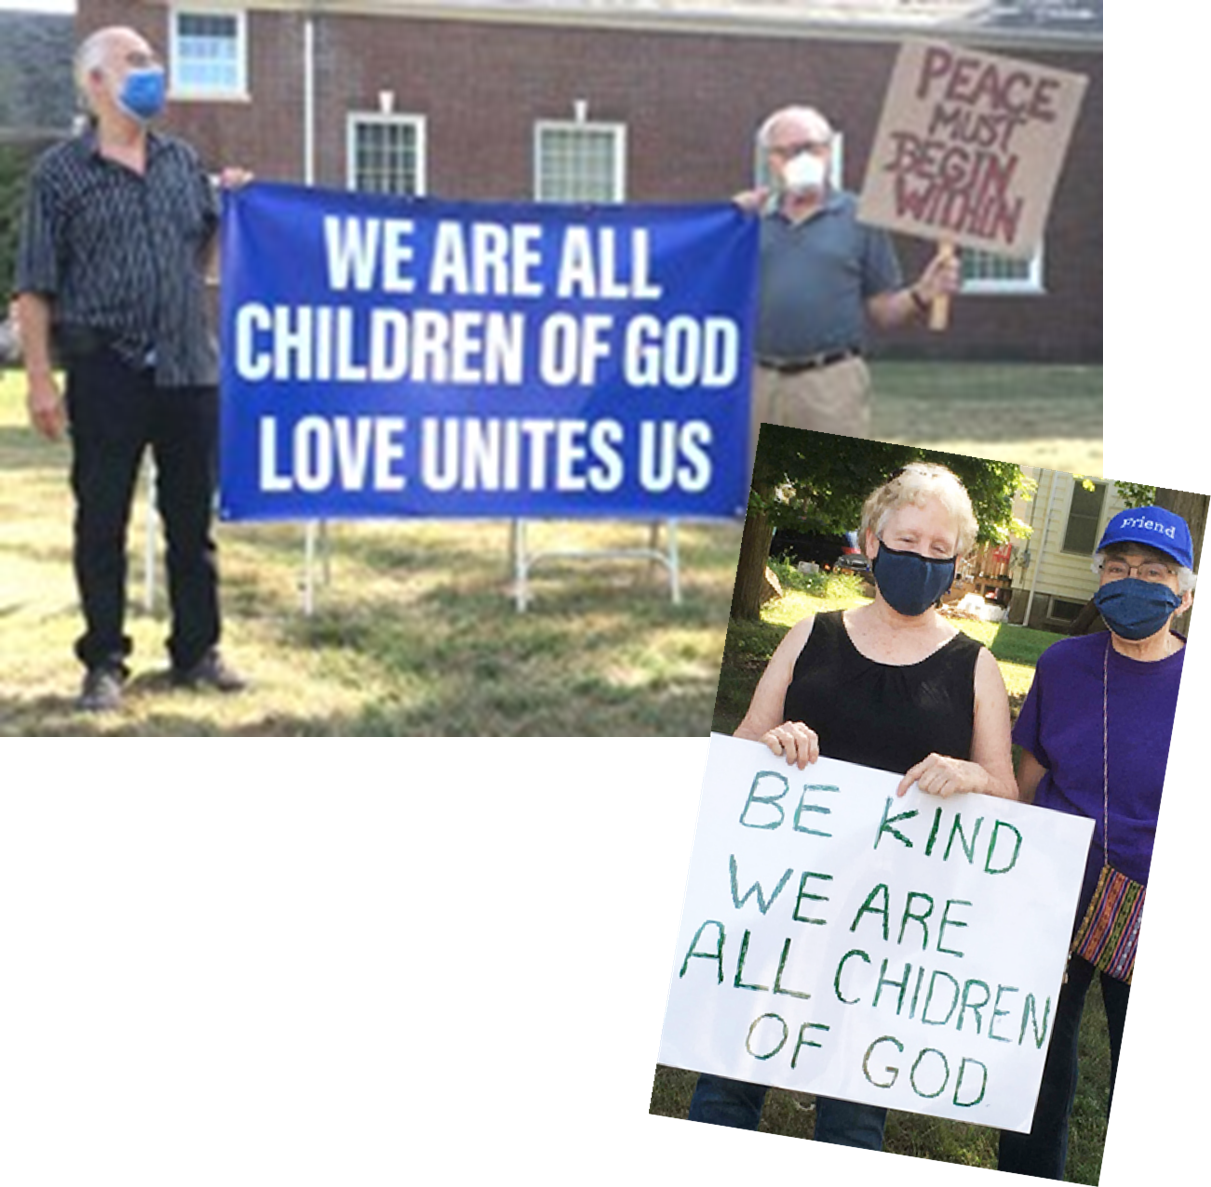 Four senior adults holding signs with messages of unity and kindness, wearing masks, standing outside a brick building.